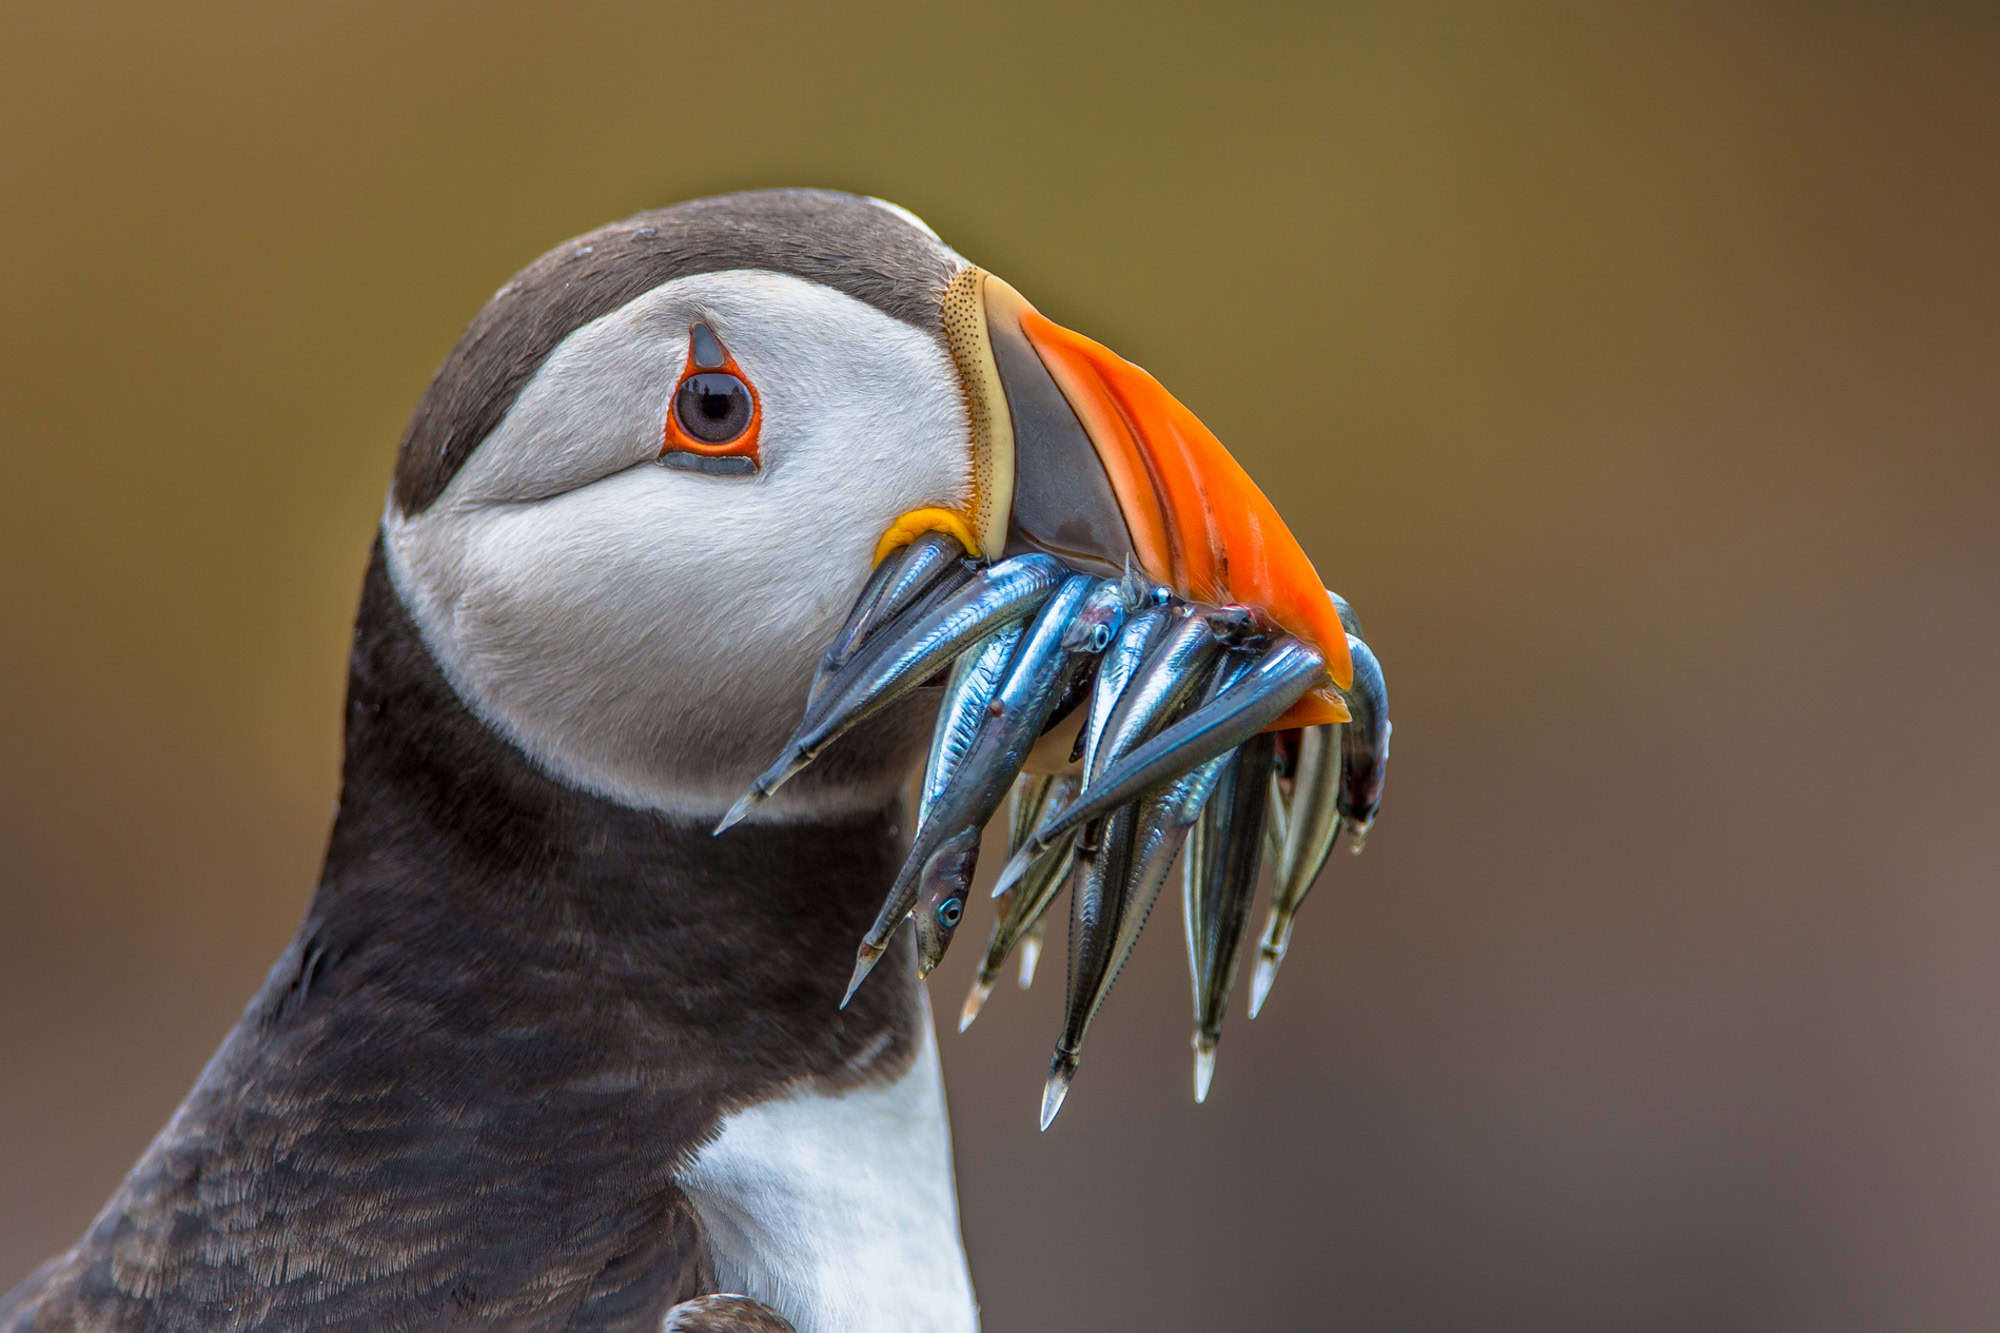 <p>Now, if you thought bears had the monopoly on Alaskan wildlife charm, hold onto your binoculars because puffins are about to steal the show. </p> <p>Puffins, with their distinctive colorful beaks (which look like they’ve raided a clown’s makeup box) and their somewhat bewildered expression, <em>are basically the supermodels of the avian world</em>. Spotting one in the wild? It’s like catching a glimpse of avian royalty. The Kenai Fjords are their runway, where they gather in colonies on the rugged cliff faces.</p> <p>Did you know that <strong>these birds are excellent swimmers</strong>, using their wings to “fly” underwater in search of fish? And here’s something that might surprise you – <strong>puffins can carry several fish in their beaks at once, thanks to their unique hinging mechanism</strong>. It’s like they’re equipped with nature’s own multi-tool.</p> <div class="wp-block-kadence-iconlist kt-svg-icon-list-items kt-svg-icon-list-items3695_b7ddfe-55 kt-svg-icon-list-columns-1 alignnone"> <ul class="kt-svg-icon-list"> <li class="wp-block-kadence-listitem kt-svg-icon-list-item-wrap kt-svg-icon-list-item-3695_a686ab-55"><span><strong>Best Time To Visit:</strong> Late Spring to Early Fall (May to September)</span></li> </ul> </div> <div class="wp-block-kadence-iconlist kt-svg-icon-list-items kt-svg-icon-list-items3695_461181-82 kt-svg-icon-list-columns-1 alignnone"> <ul class="kt-svg-icon-list"> <li class="wp-block-kadence-listitem kt-svg-icon-list-item-wrap kt-svg-icon-list-item-3695_df3227-09"><span><strong>Discover More:</strong> <em>While traversing the white tundra of Alaska, <a href="https://discoverparksandwildlife.com/animals-that-use-camouflage/">keep your eyes peeled for a master of camouflage, one very similar to the one we have on our list</a>. Can you guess which one and spot it amidst the snowy expanse?</em></span></li> </ul> </div>